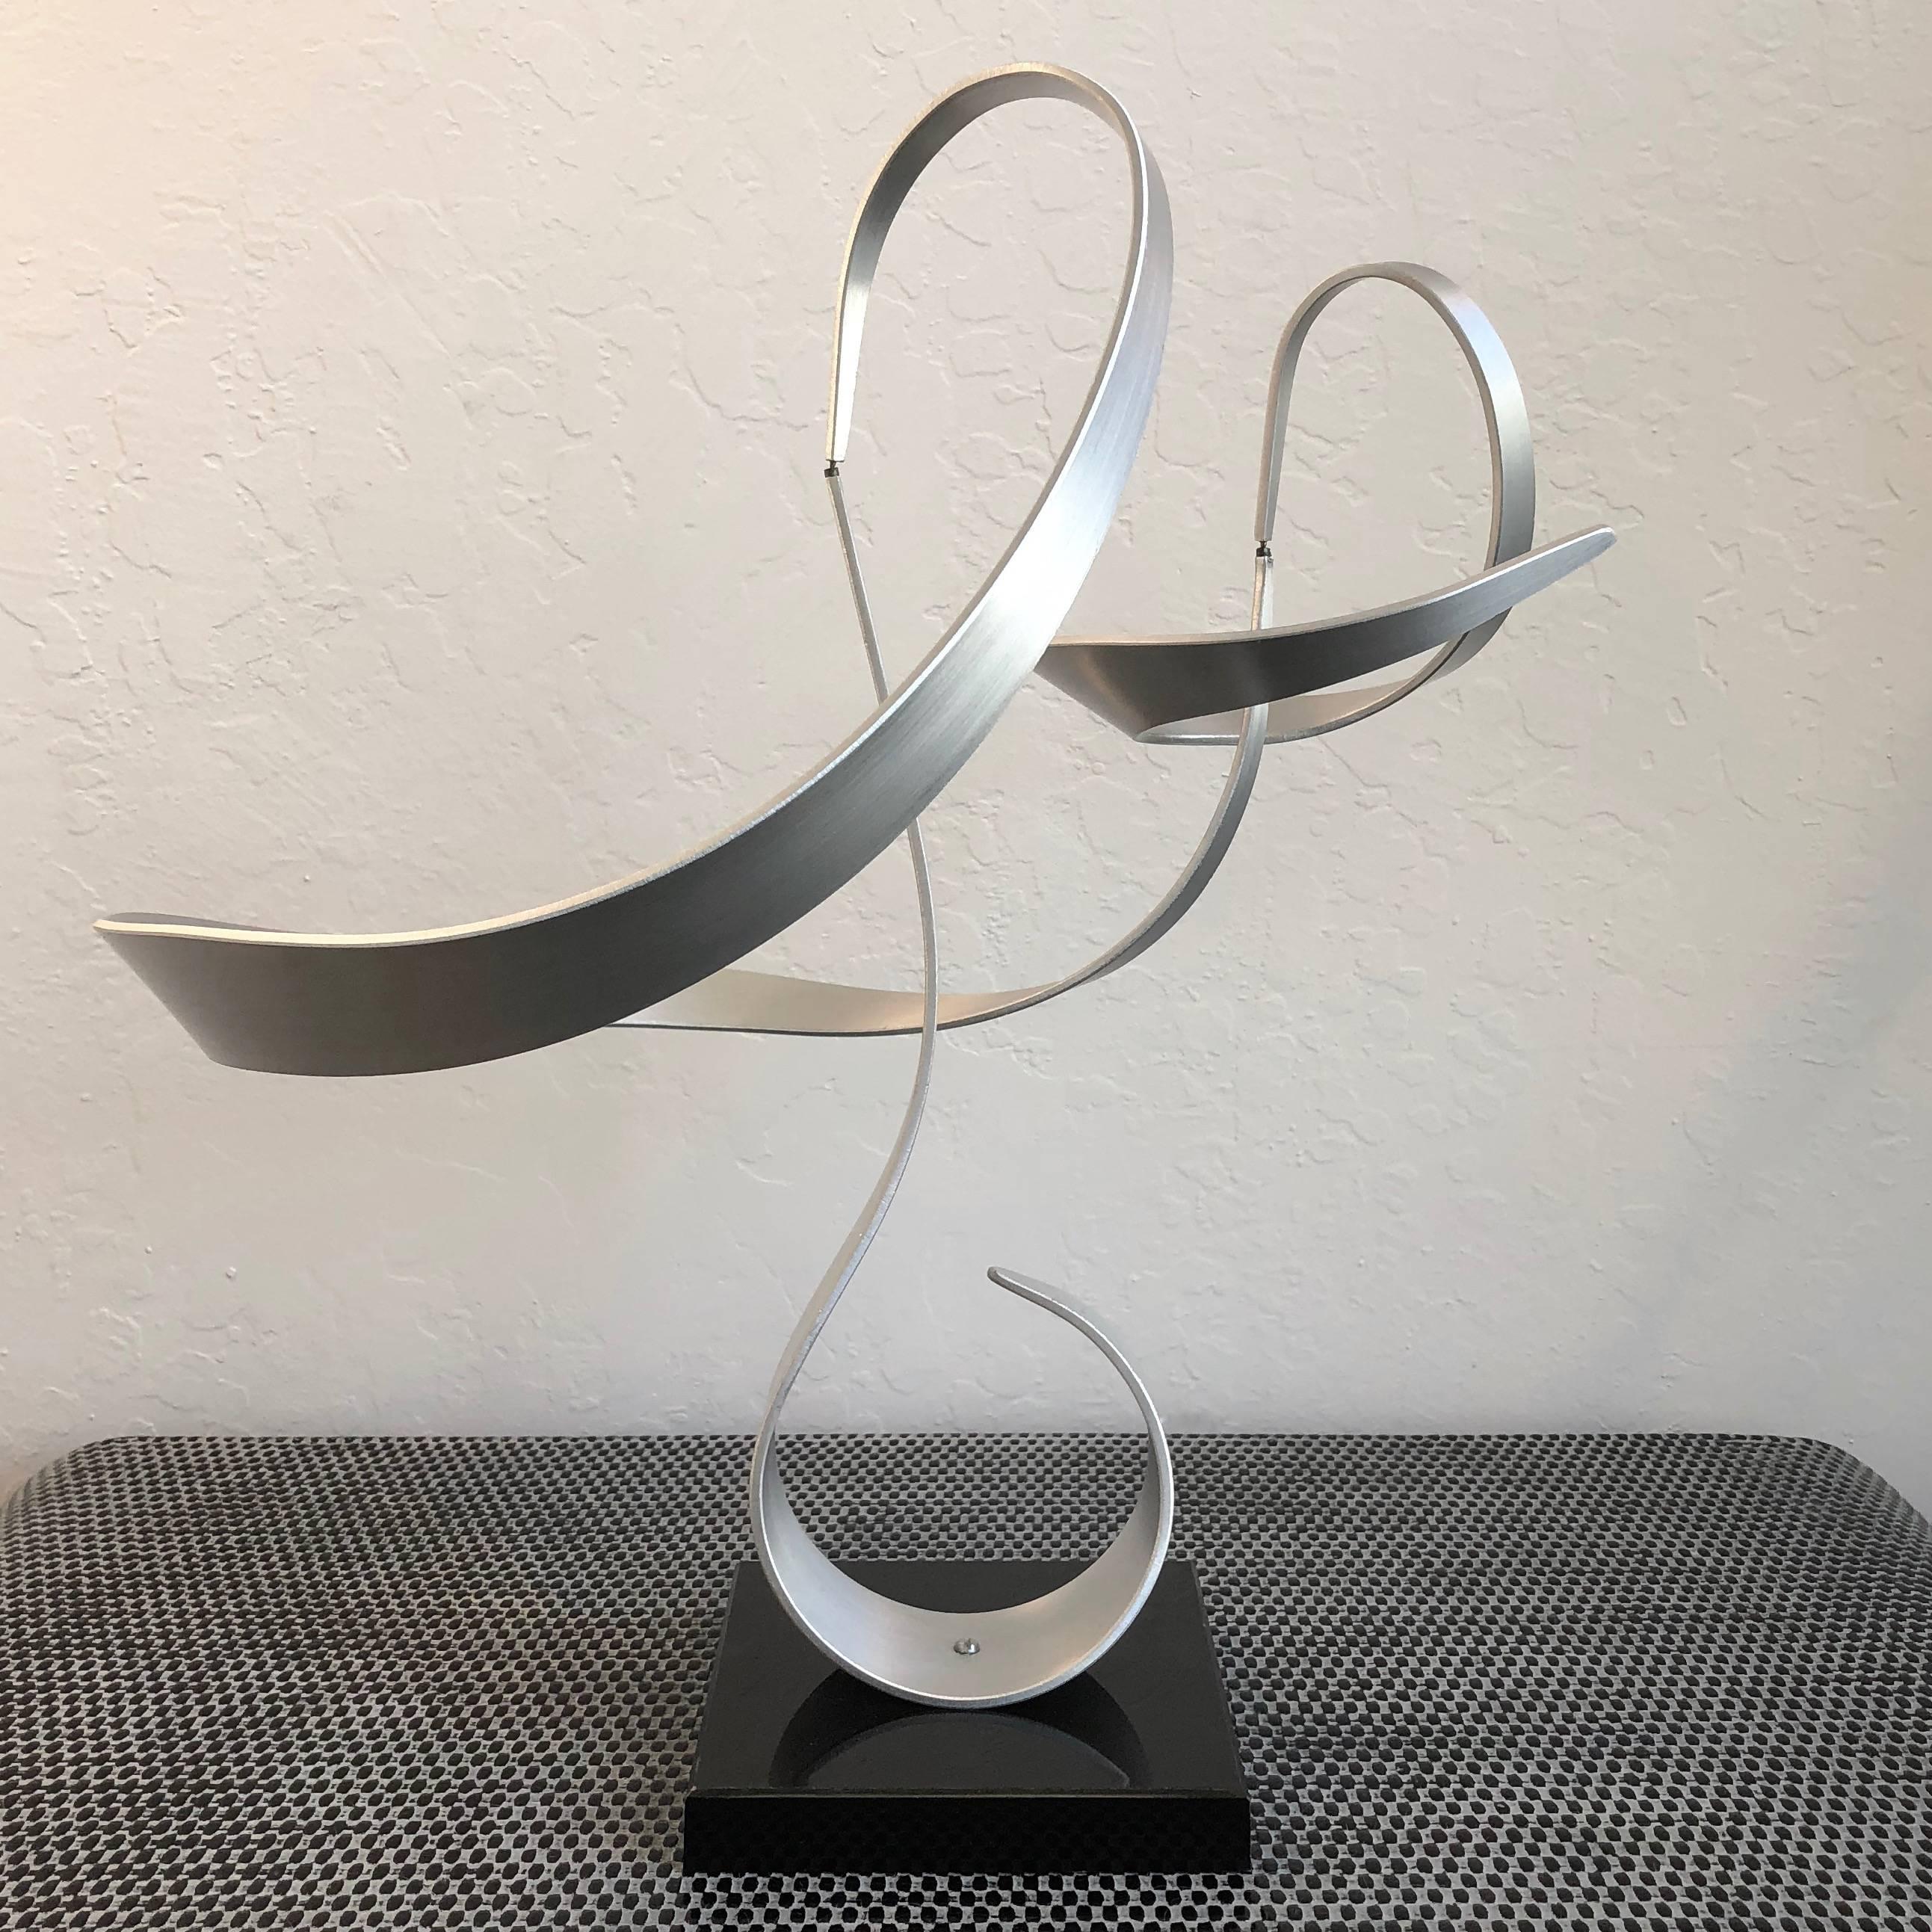 A mesmerizing abstract kinetic sculpture by 1970s artist John W. Anderson.

Comprised of three gracefully twisting brushed aluminium ribbons on a black acrylic base. The top two segments balance weightlessly on tiny pins, allowing them to